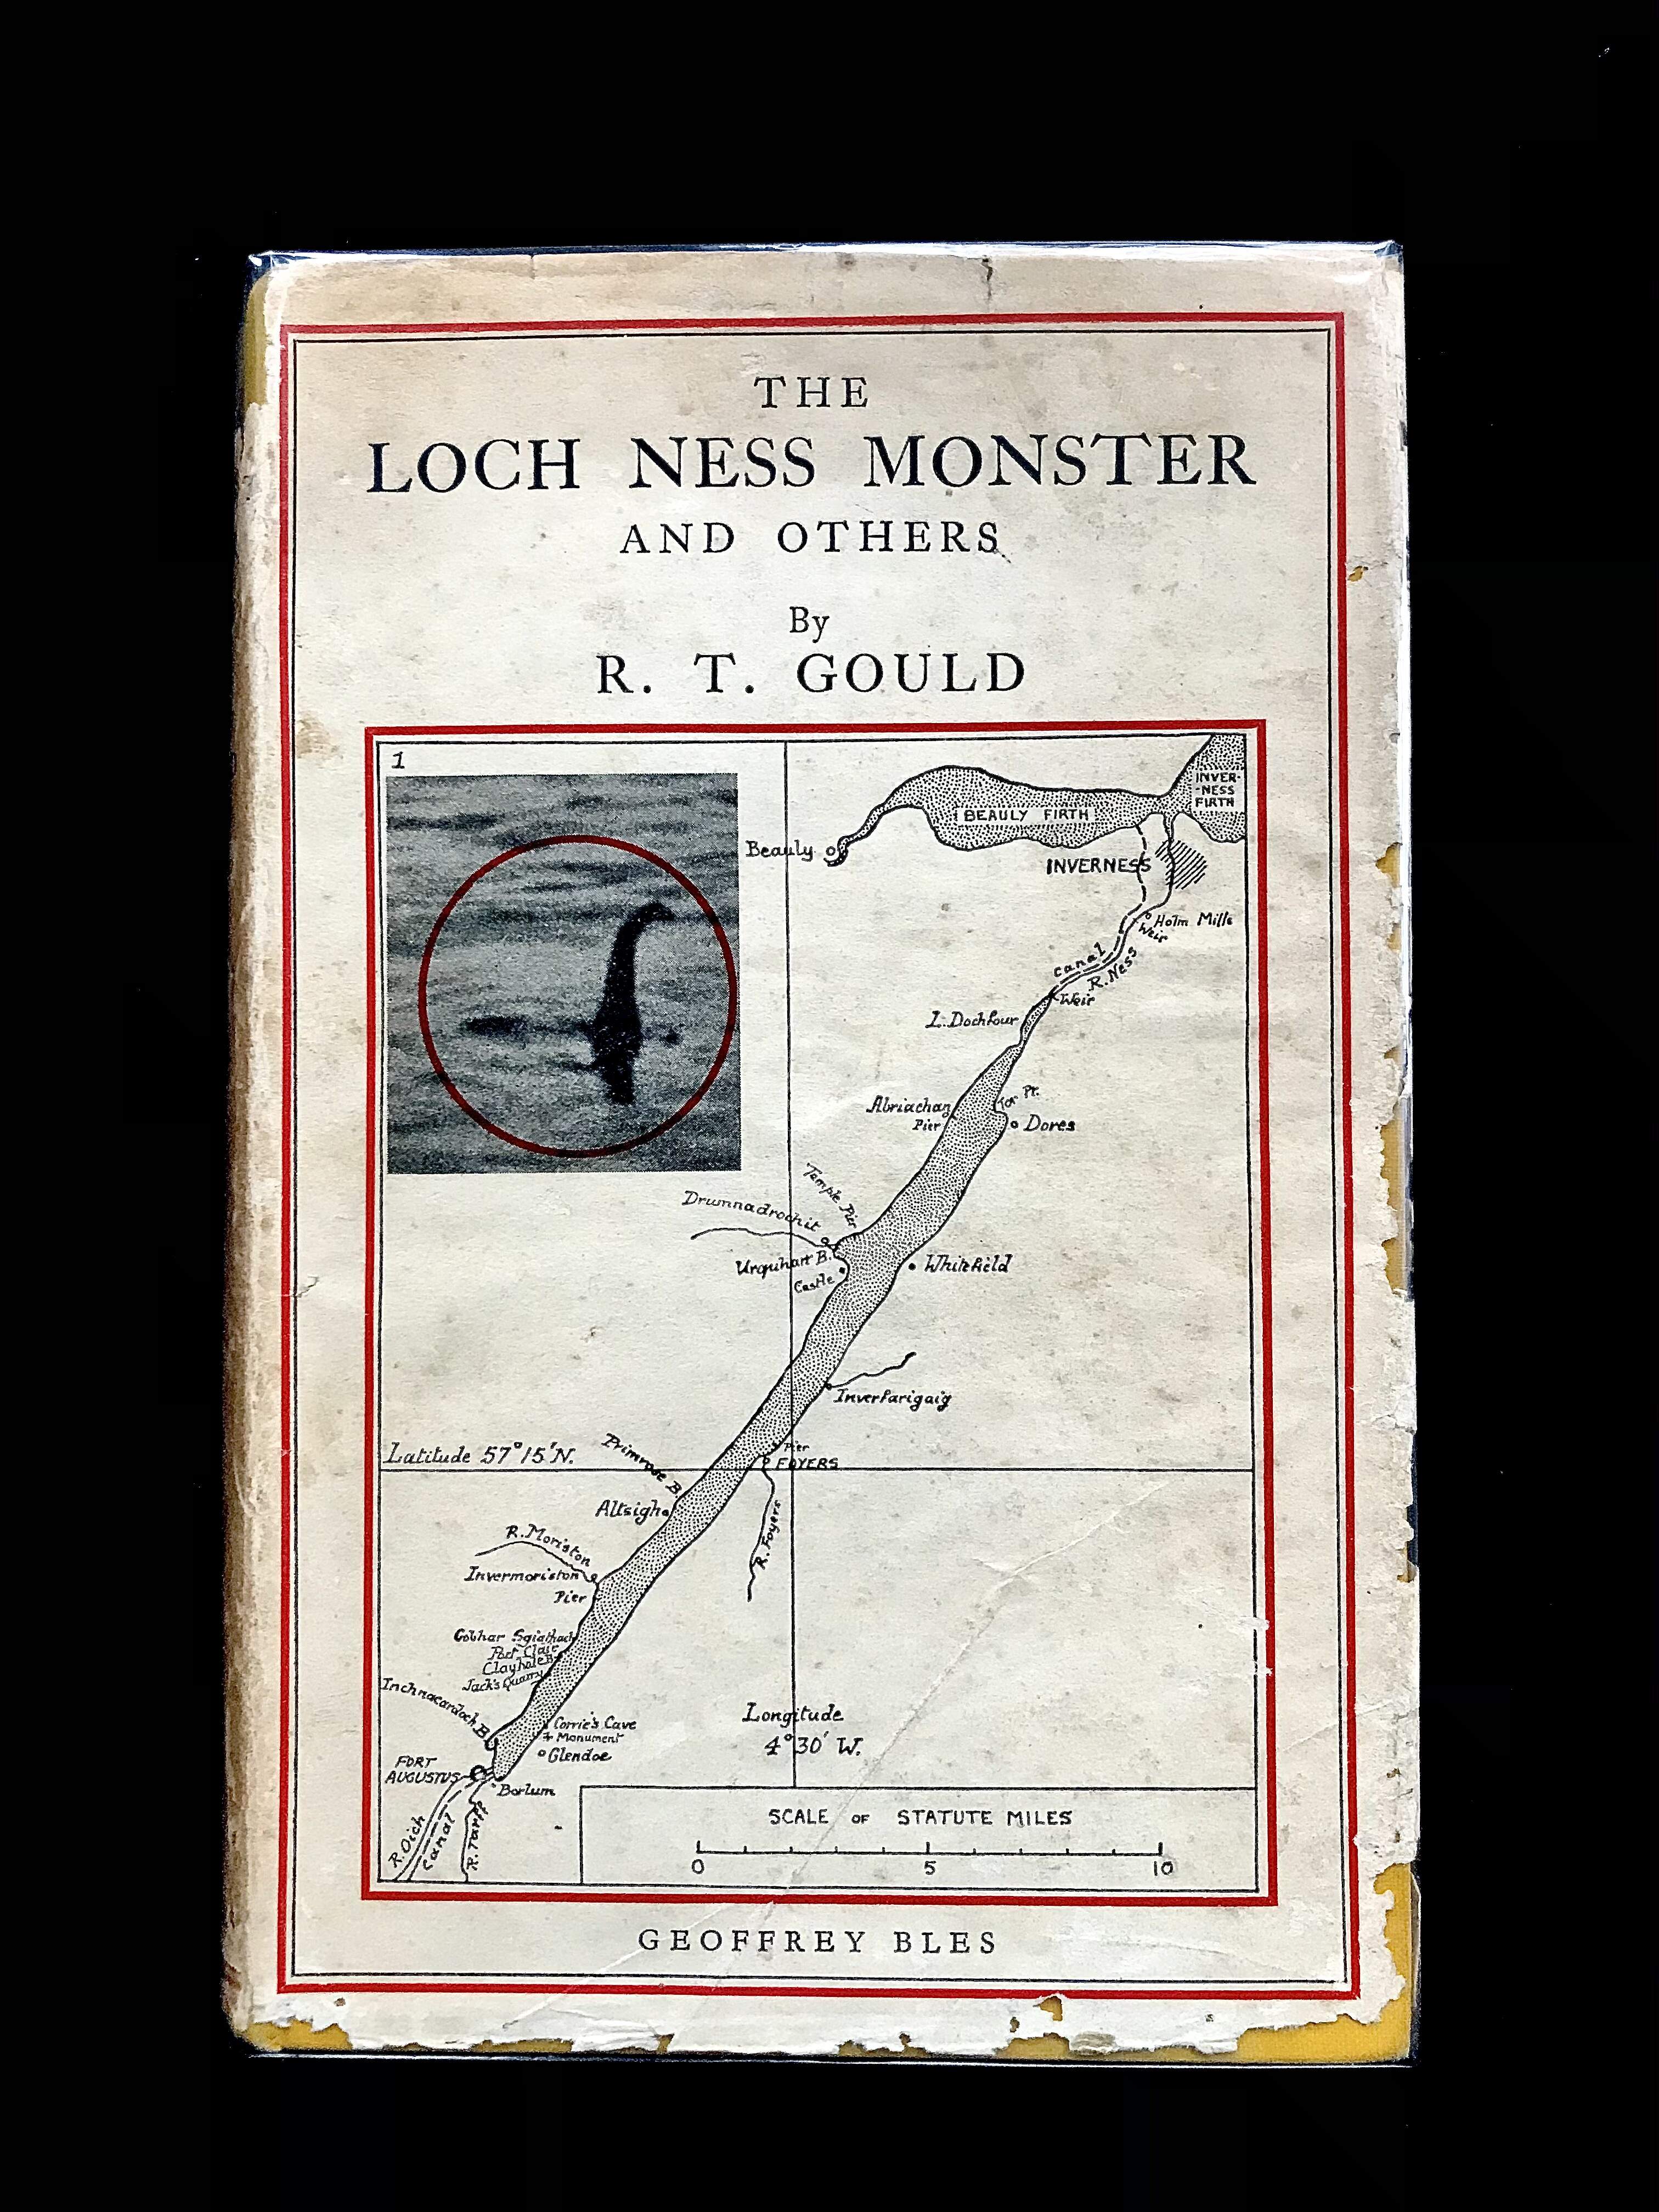 The Loch Ness Monster and Others by R. T. Gould